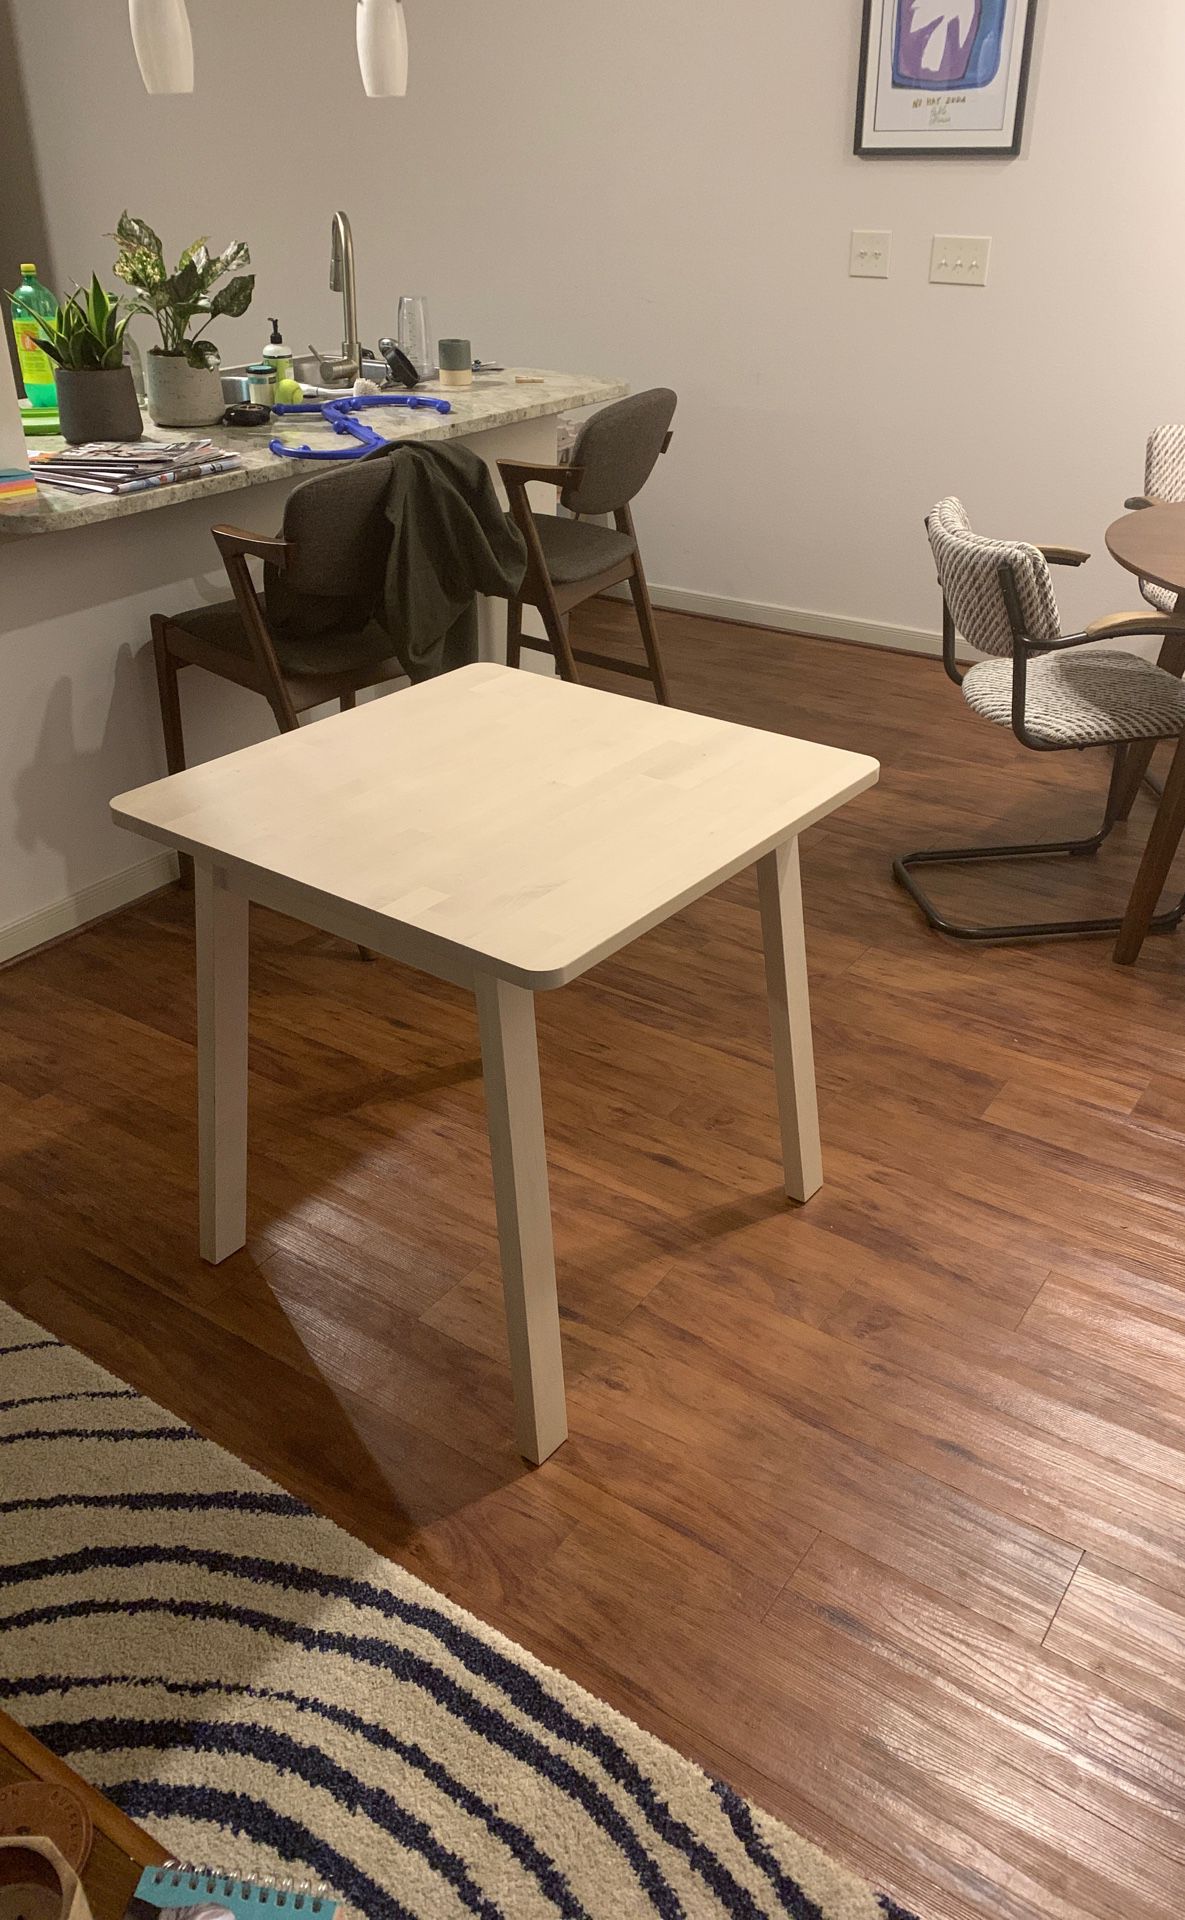 Medium-small kitchen table! Barely used!